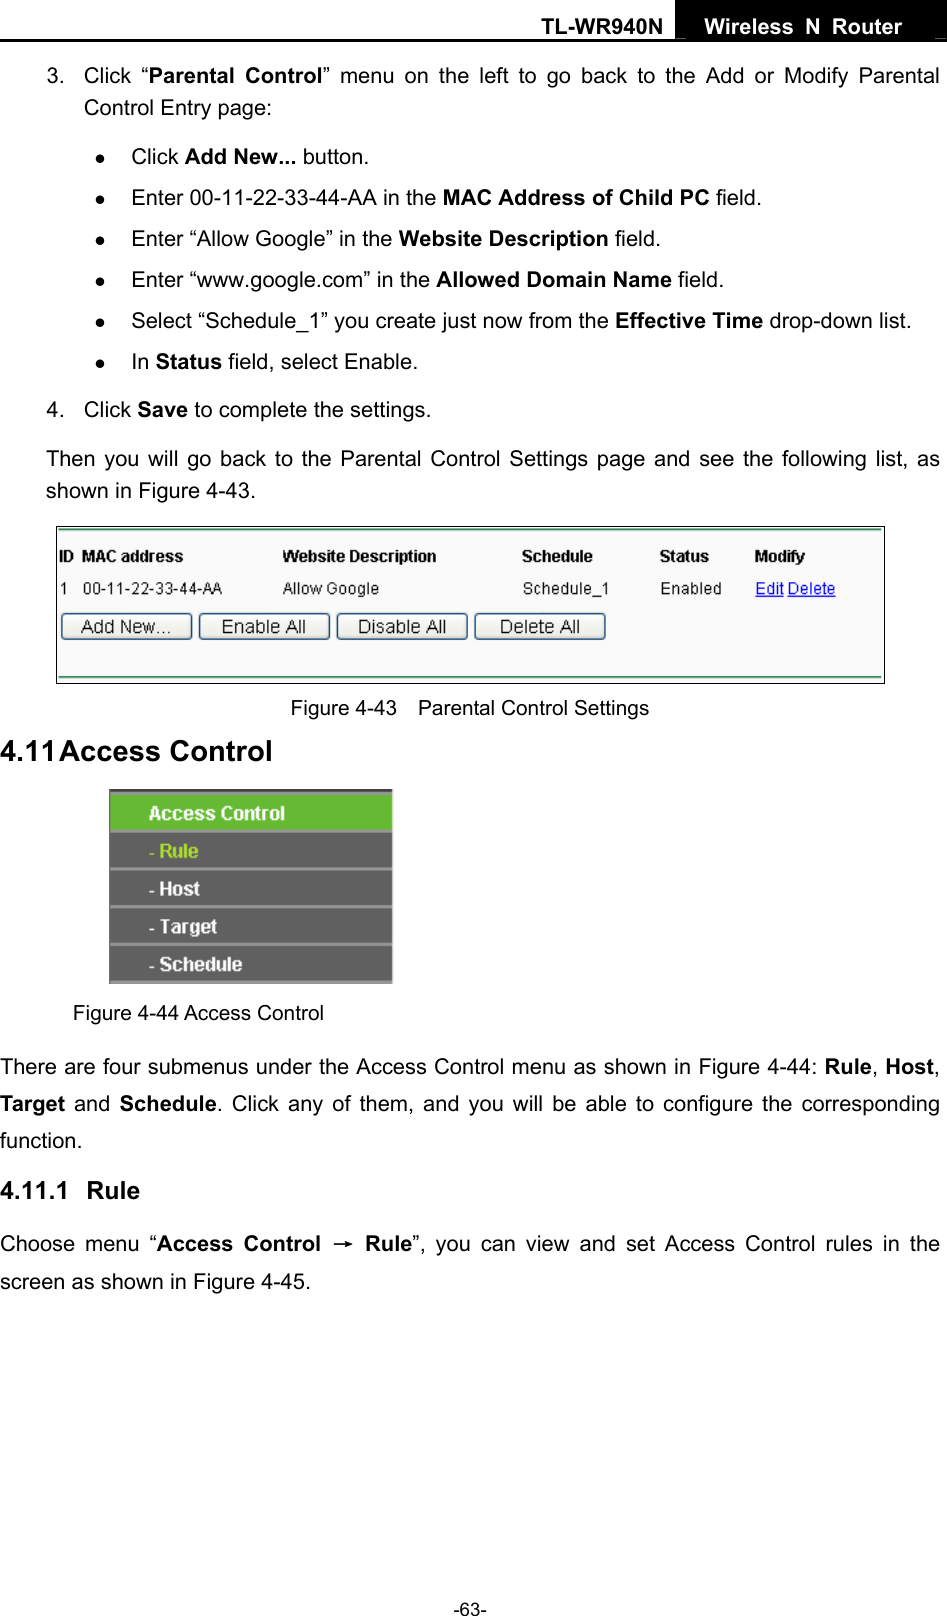 TL-WR940N  Wireless N Router   3. Click “Parental Control” menu on the left to go back to the Add or Modify Parental Control Entry page:   z Click Add New... button.   z Enter 00-11-22-33-44-AA in the MAC Address of Child PC field.   z Enter “Allow Google” in the Website Description field.   z Enter “www.google.com” in the Allowed Domain Name field.   z Select “Schedule_1” you create just now from the Effective Time drop-down list.   z In Status field, select Enable.   4. Click Save to complete the settings. Then you will go back to the Parental Control Settings page and see the following list, as shown in Figure 4-43.  Figure 4-43    Parental Control Settings 4.11 Access Control  Figure 4-44 Access Control There are four submenus under the Access Control menu as shown in Figure 4-44: Rule, Host, Target and Schedule. Click any of them, and you will be able to configure the corresponding function. 4.11.1   Rule Choose menu “Access Control → Rule”, you can view and set Access Control rules in the screen as shown in Figure 4-45.  -63- 